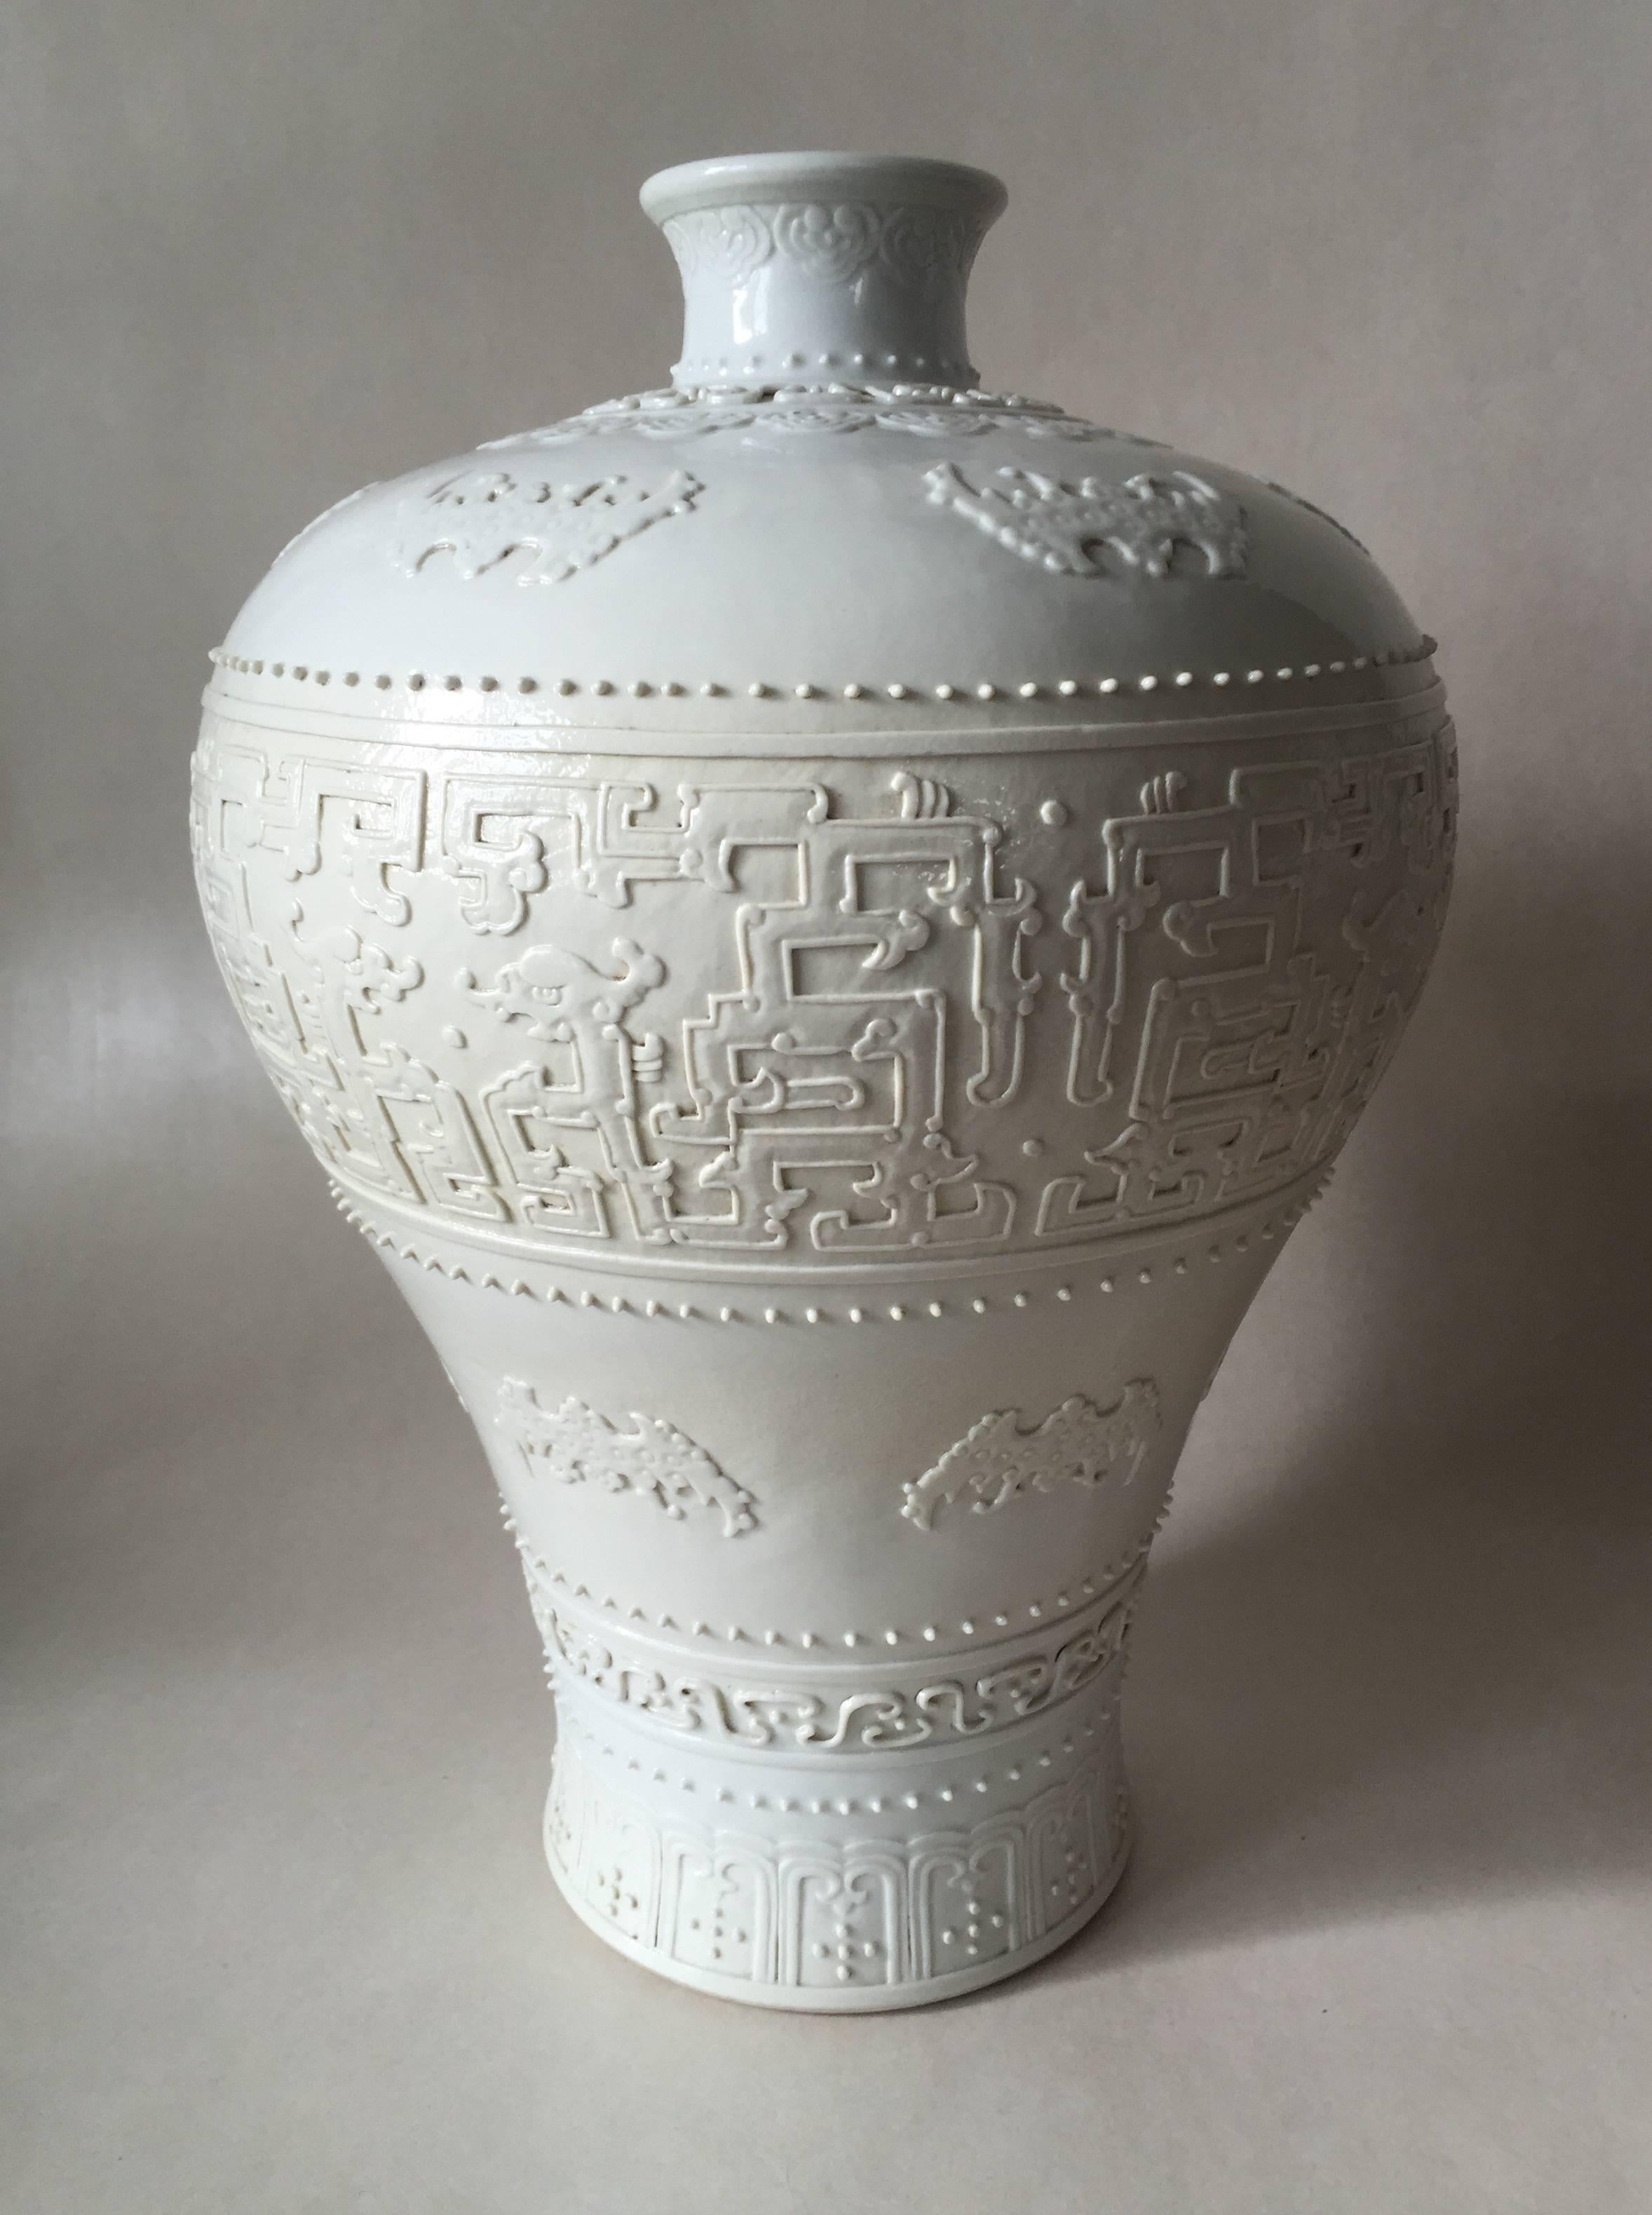 An absolutely fantastic Meiping vase decorated with bats, chilongs and ruyis. The Chilongs that are depicted along the widest part of the vase is made very accurate and precise. This vase is a fantastic early republic reproduction of an imperial